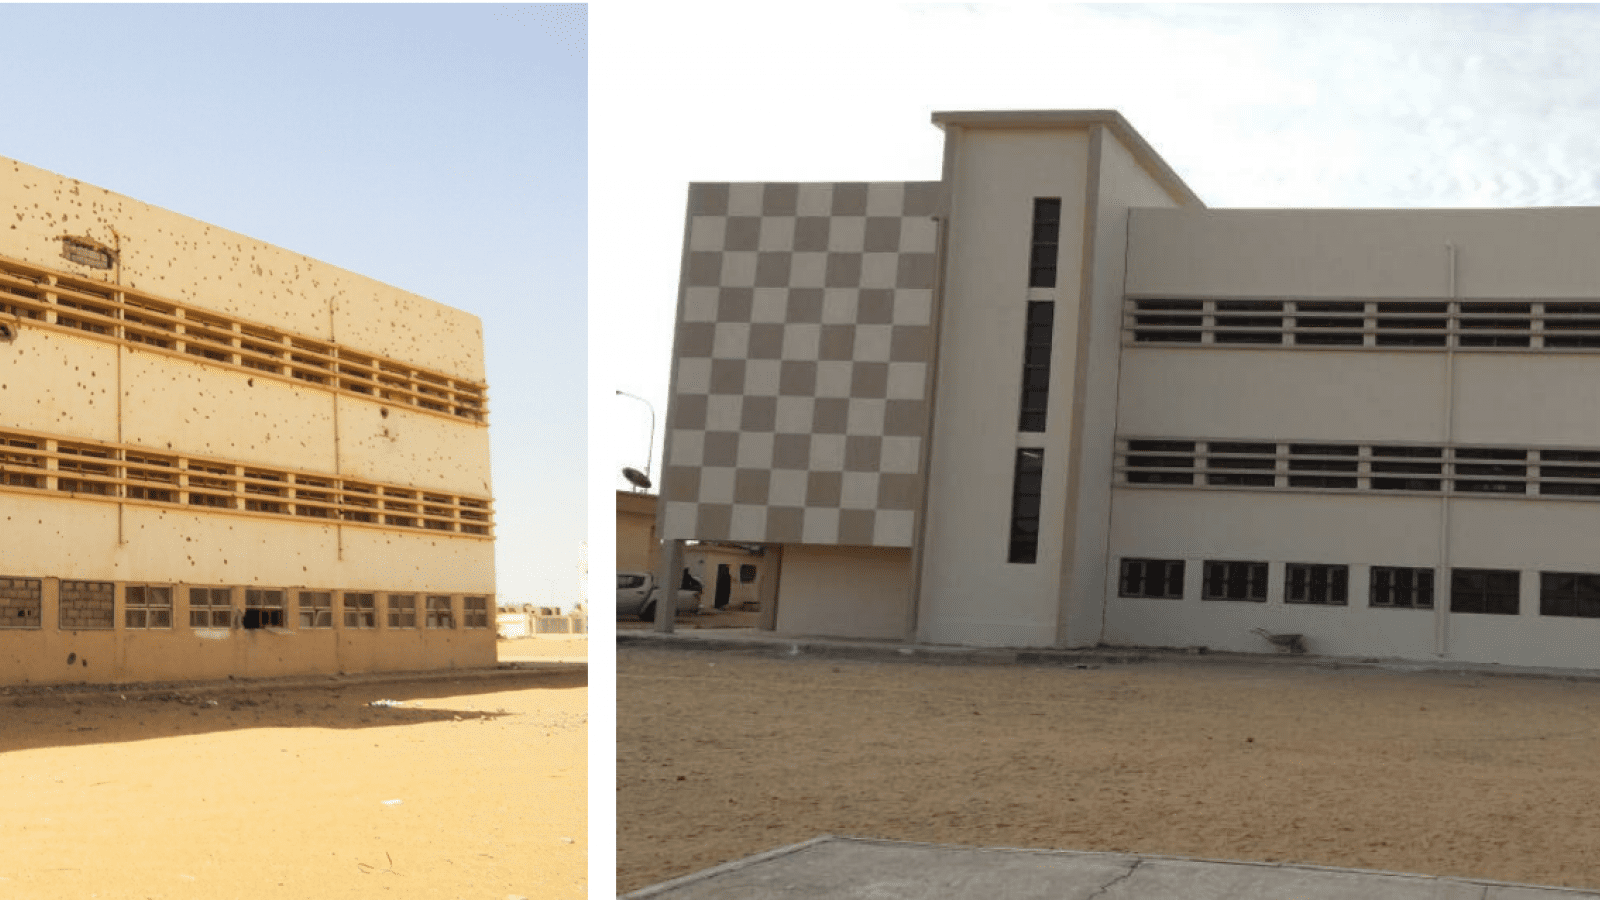 Alqurania School in Ubari before and after renovation. Photos by Ali Alshareef/ ©UNDP Libya